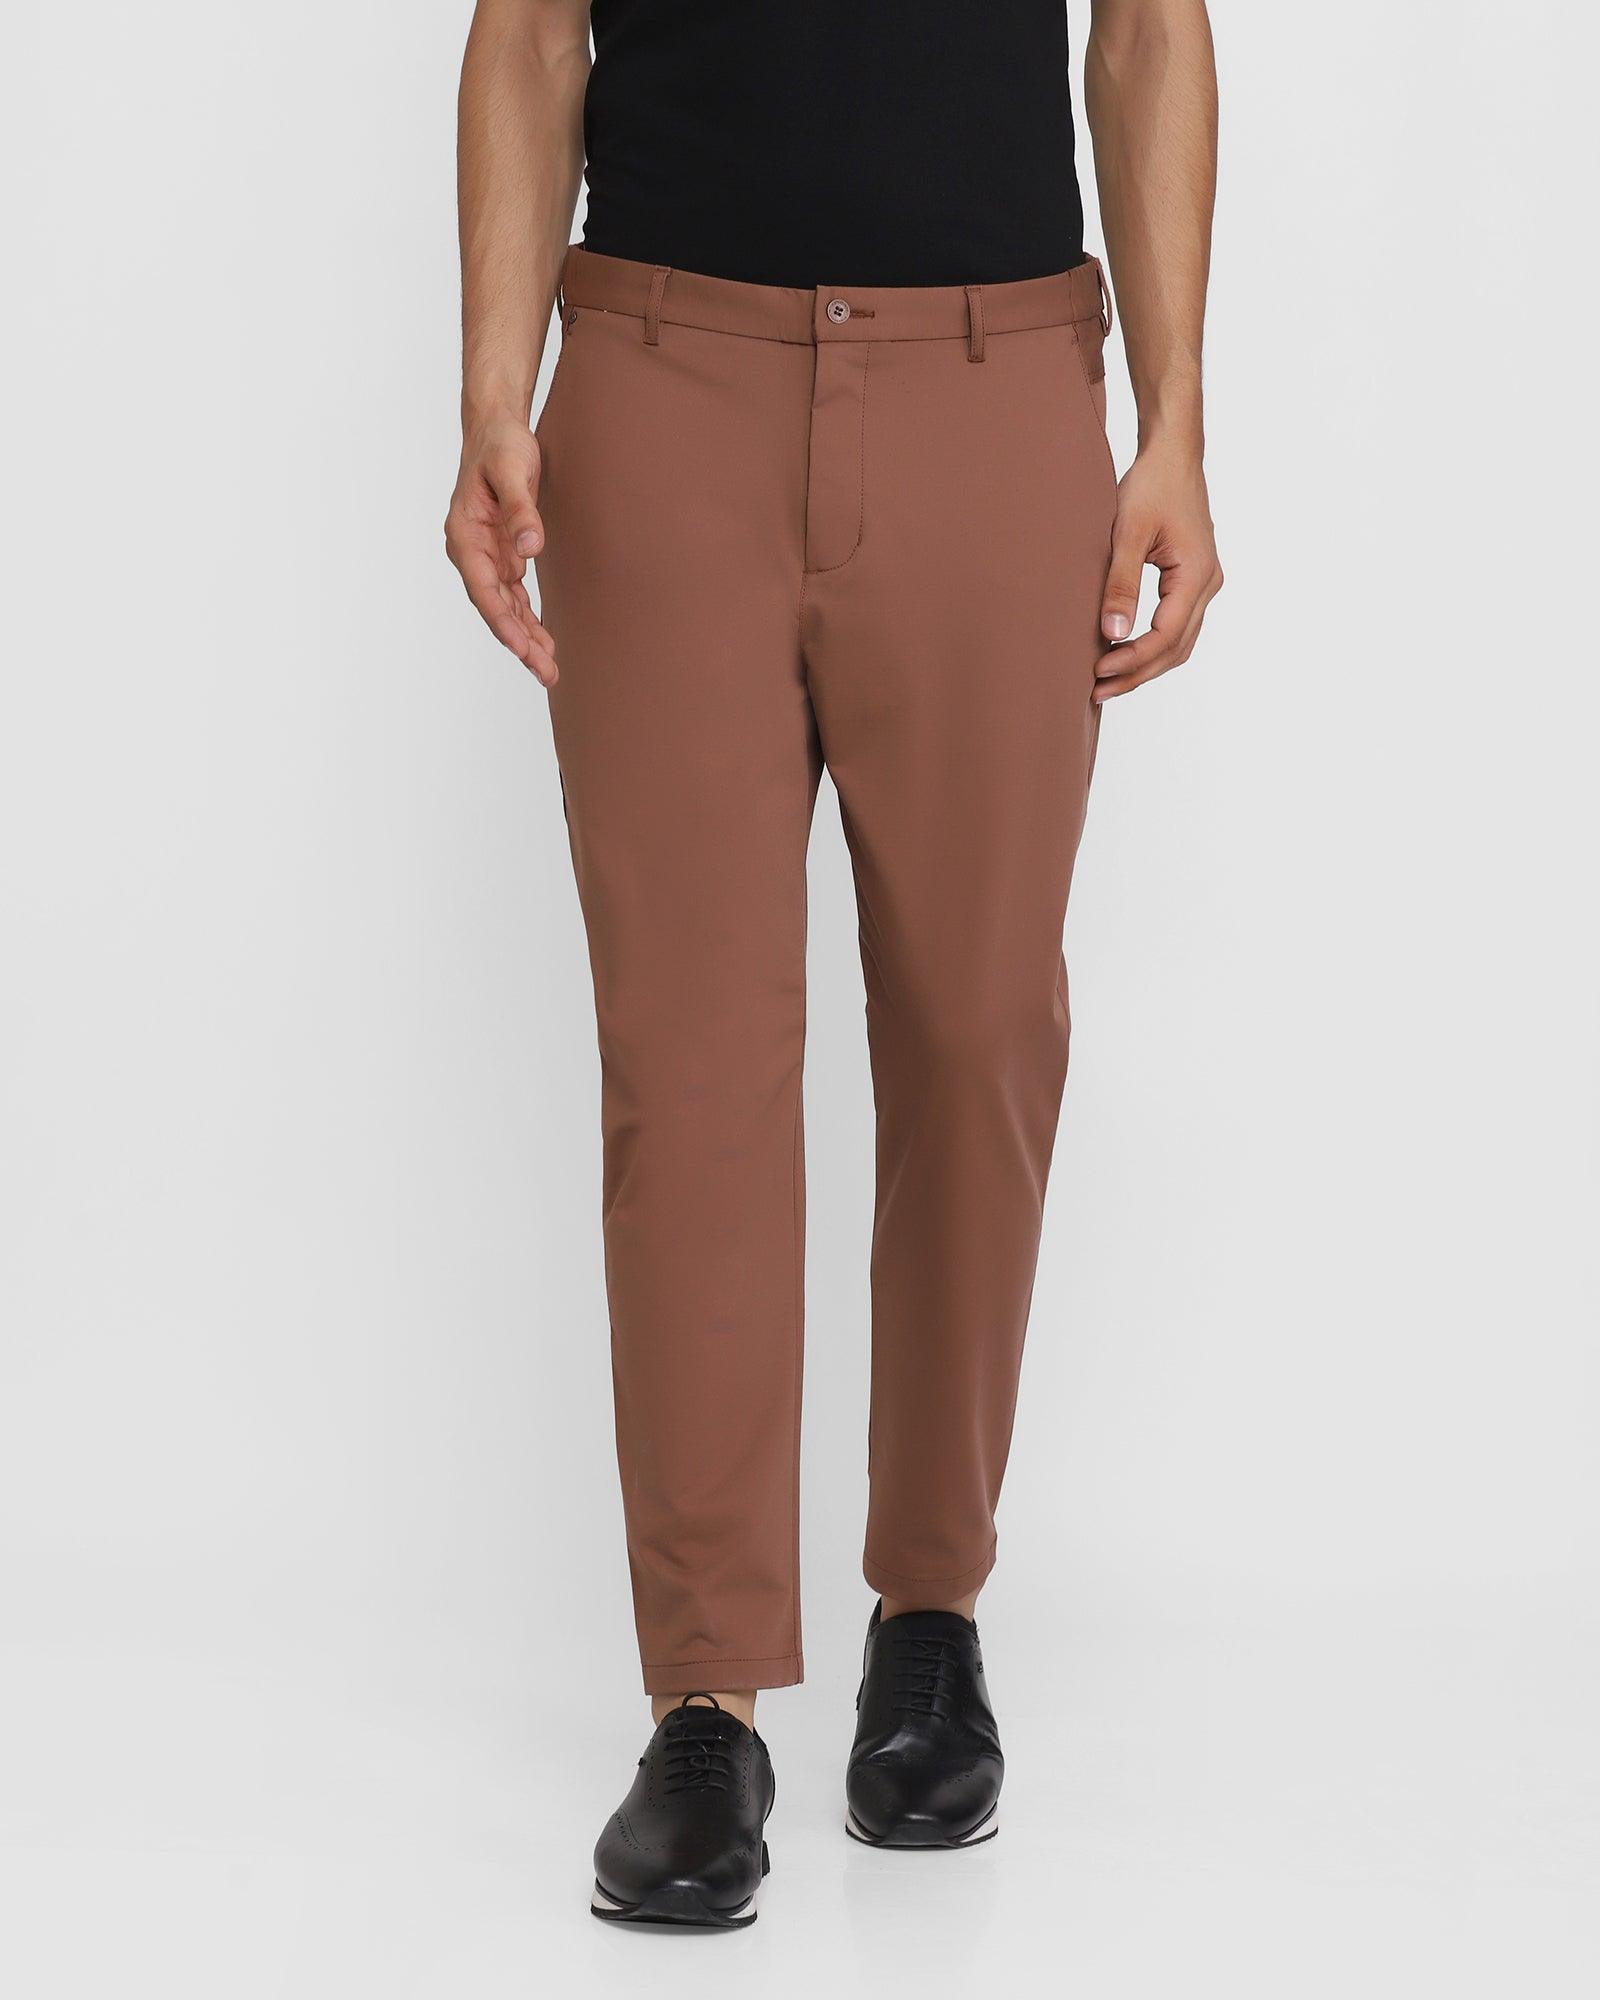 TechPro Nadal Casual Brown Textured Khakis - Hector